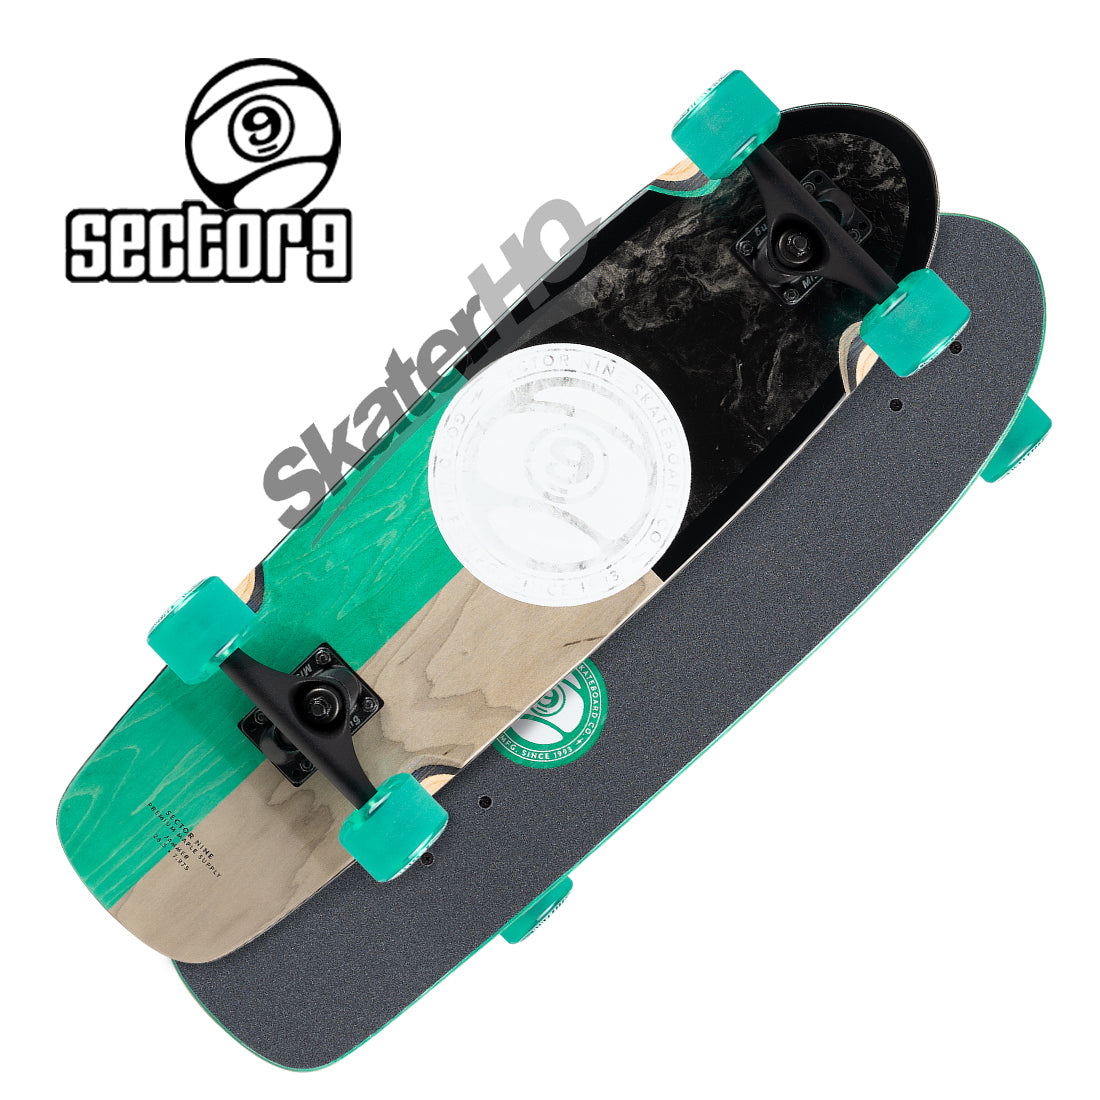 Sector 9 Jammer Divide 7.875x28.5 Complete - Black/Green Skateboard Compl Cruisers